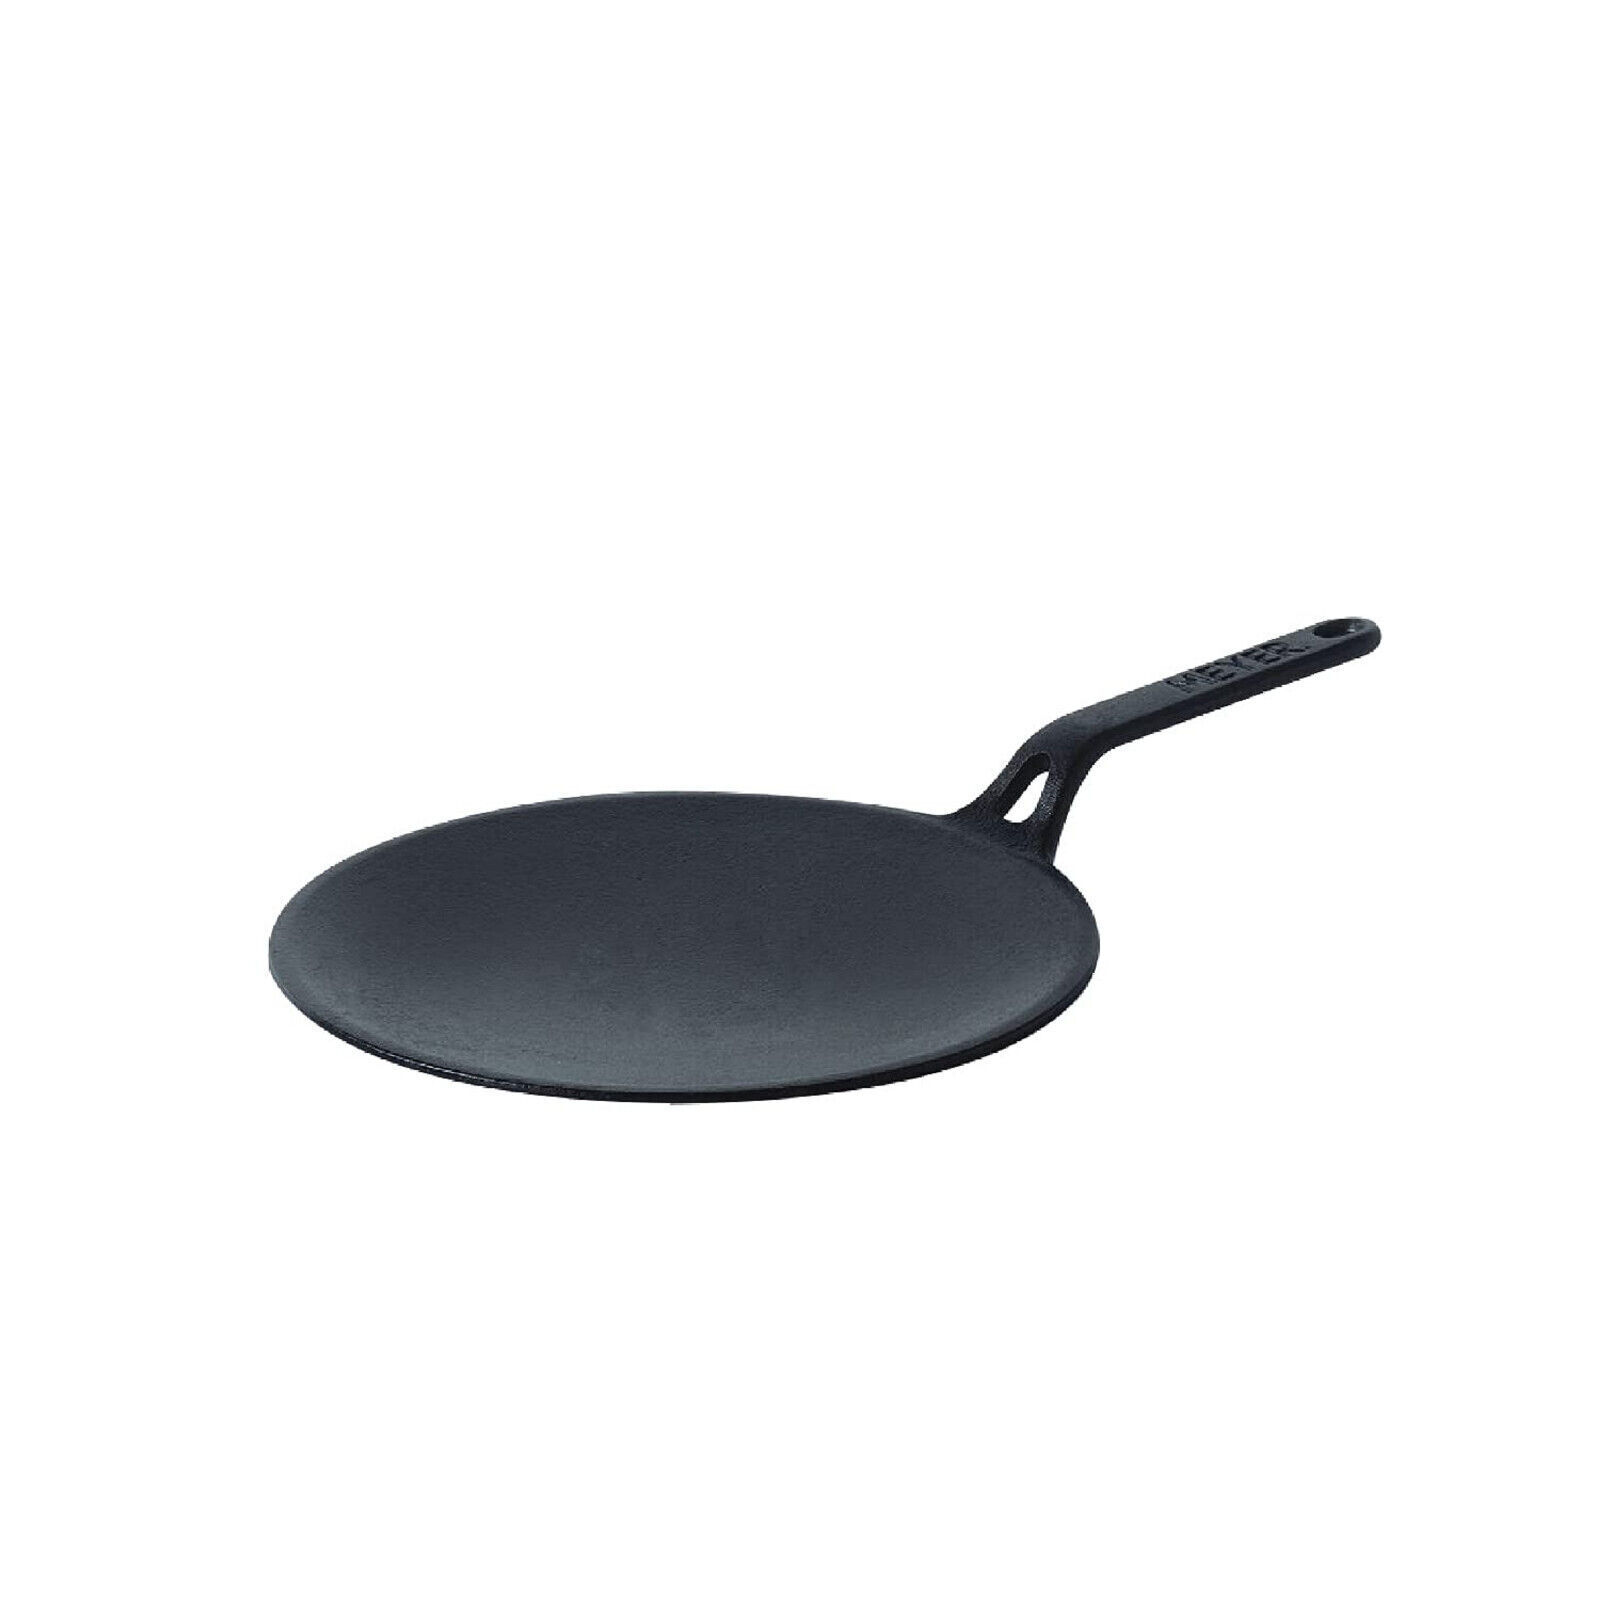 Indian Cooking Dosa Iron Tawa With Stick Handle 26cm Color Black